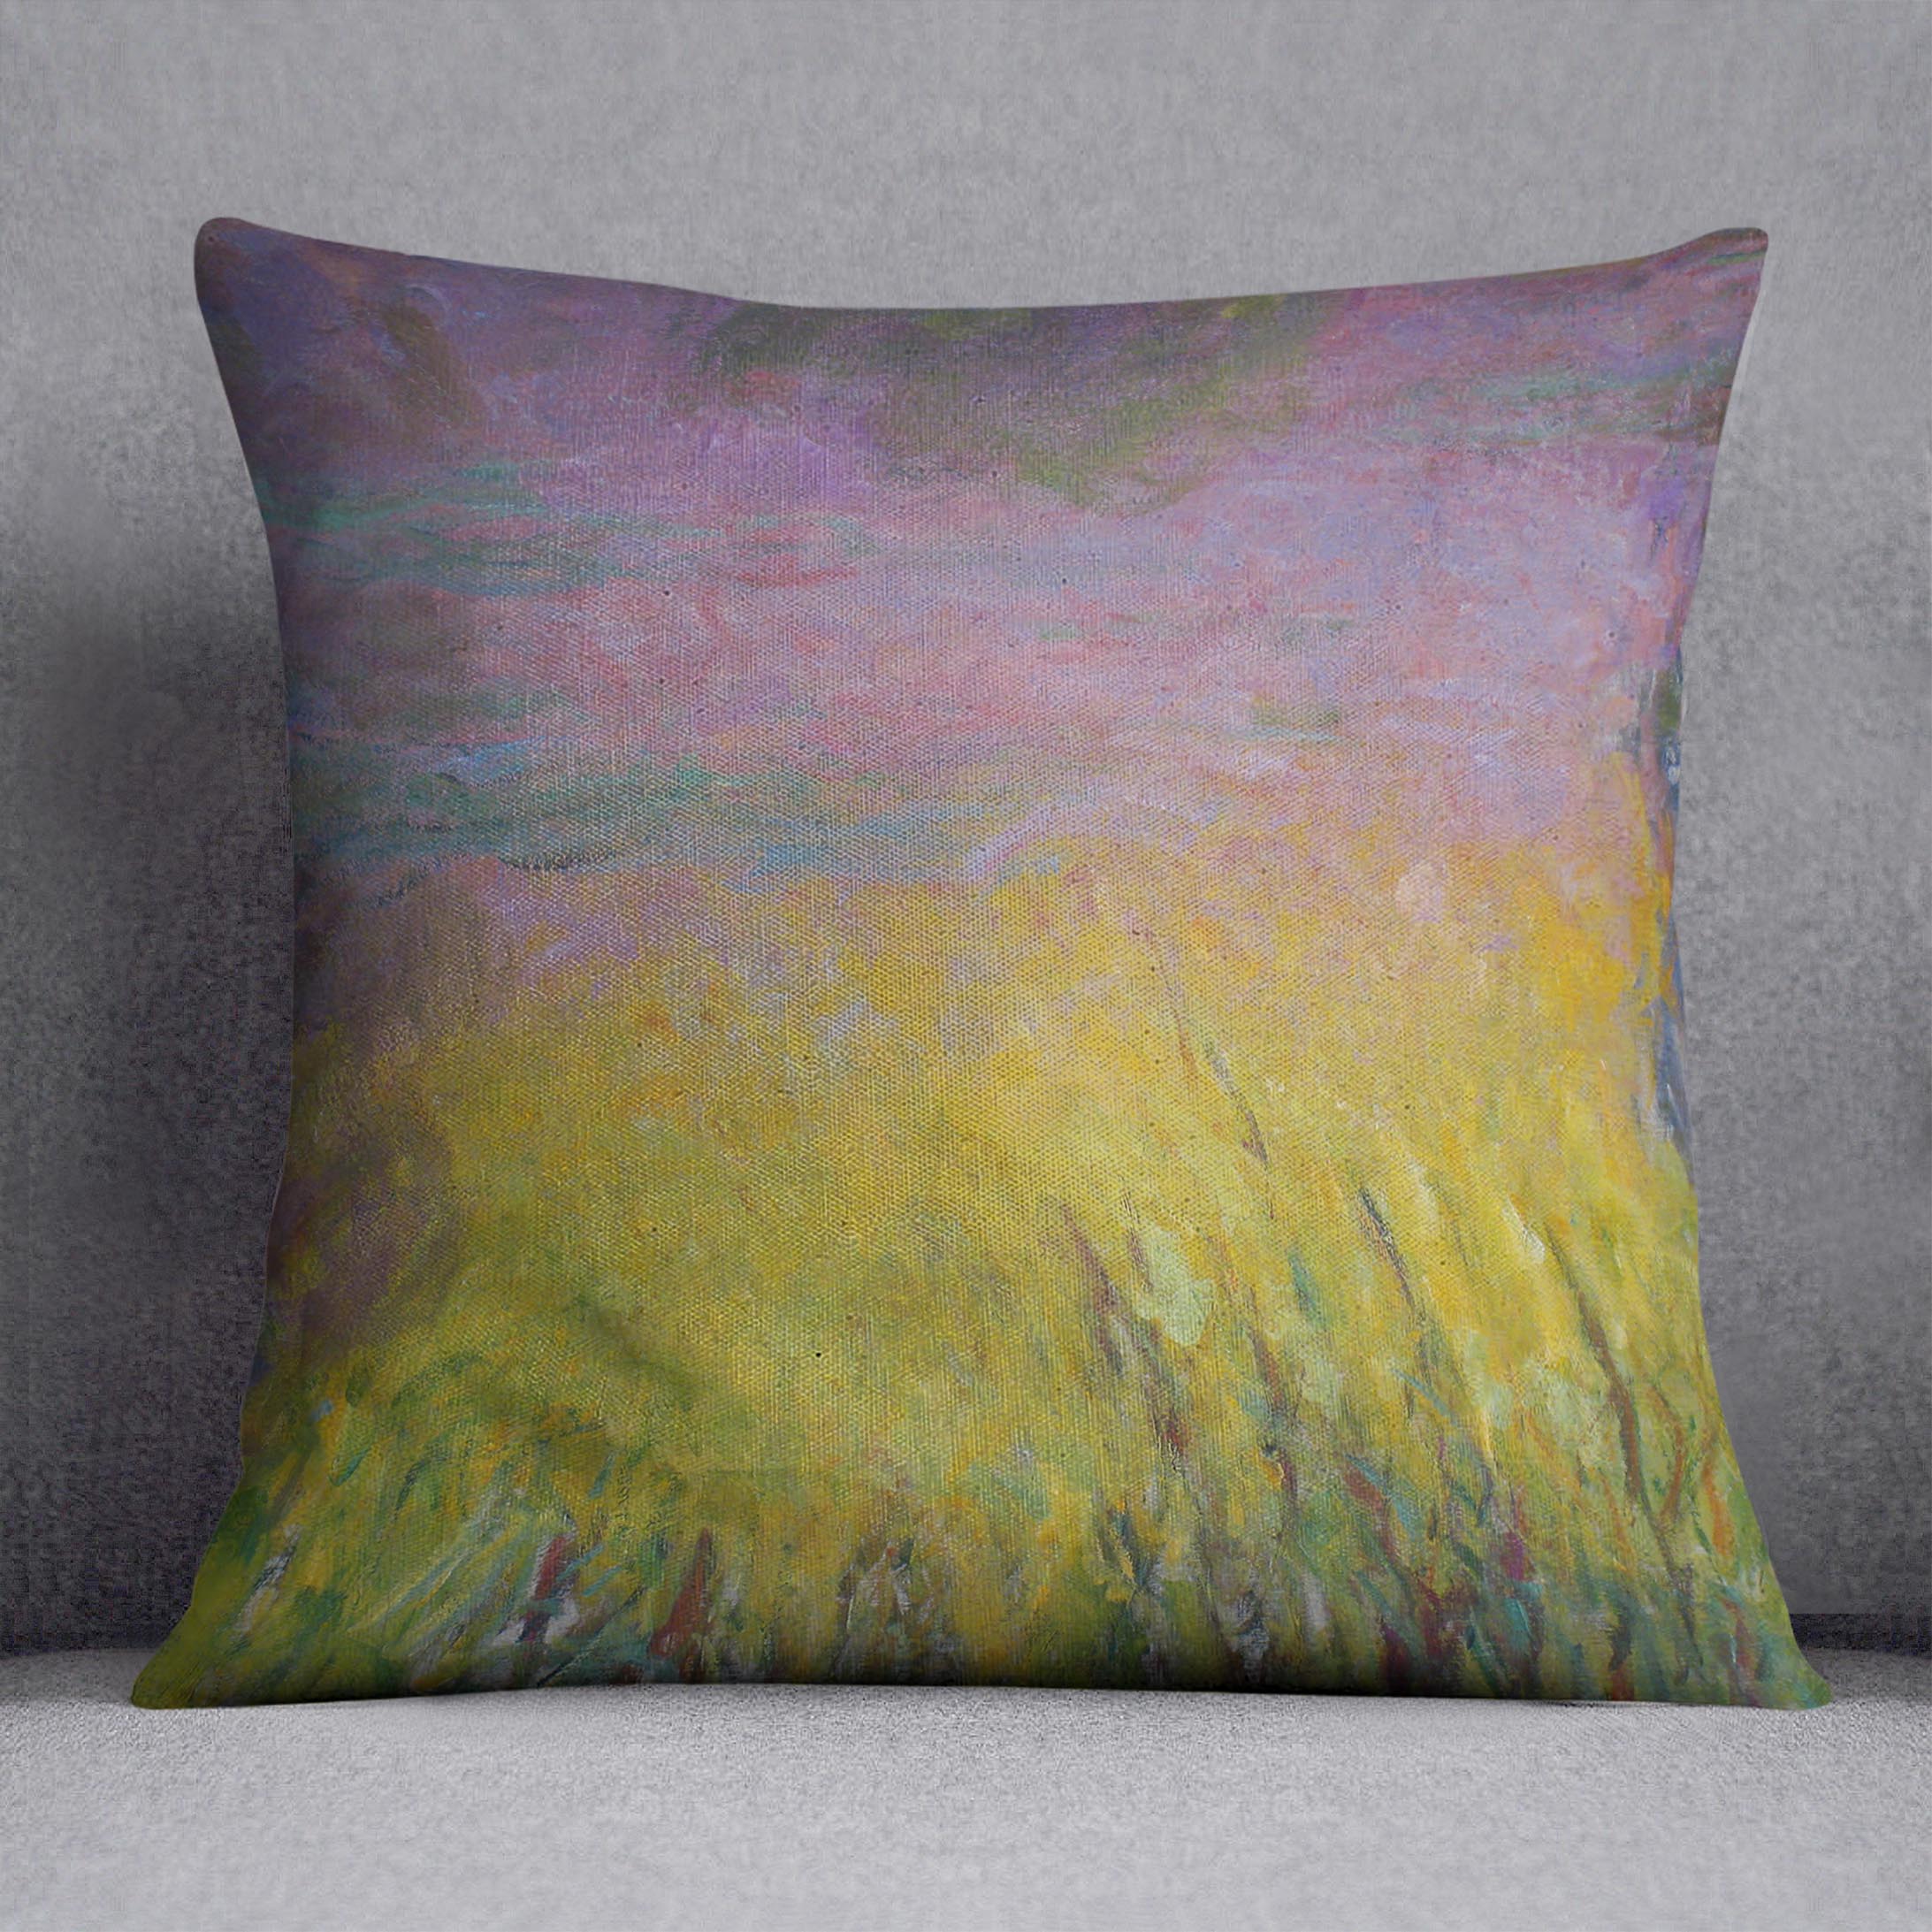 Water Lillies 12 by Monet Cushion